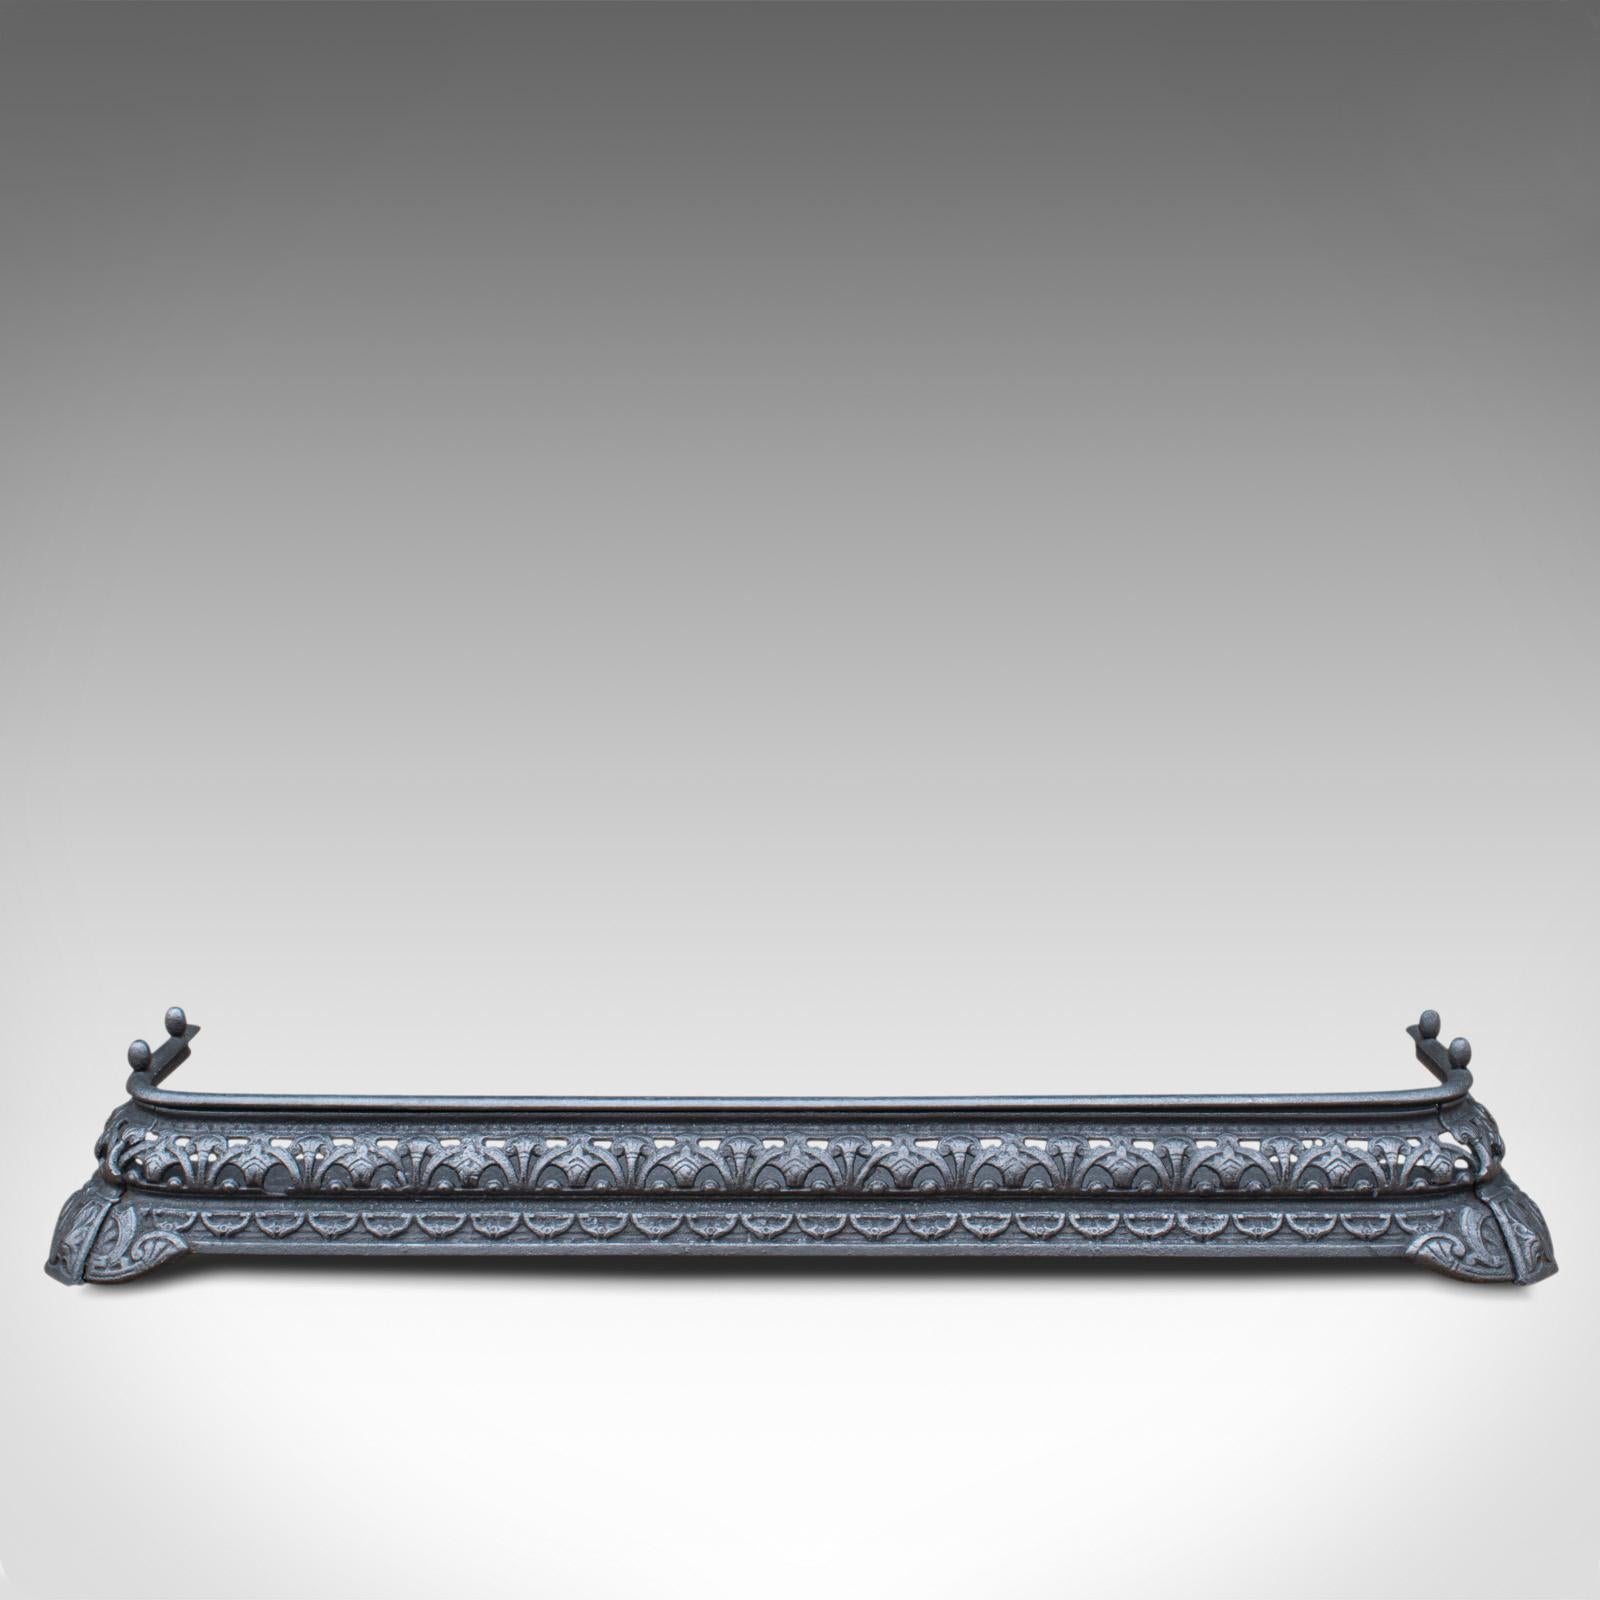 This is an antique fire kerb and companion tongs. An English, iron fireside set, dating to the Victorian period, circa 1850.

An appealing, Victorian fireside set
Displays a desirable aged patina
Fire kerb crafted from cast iron
Decorative,